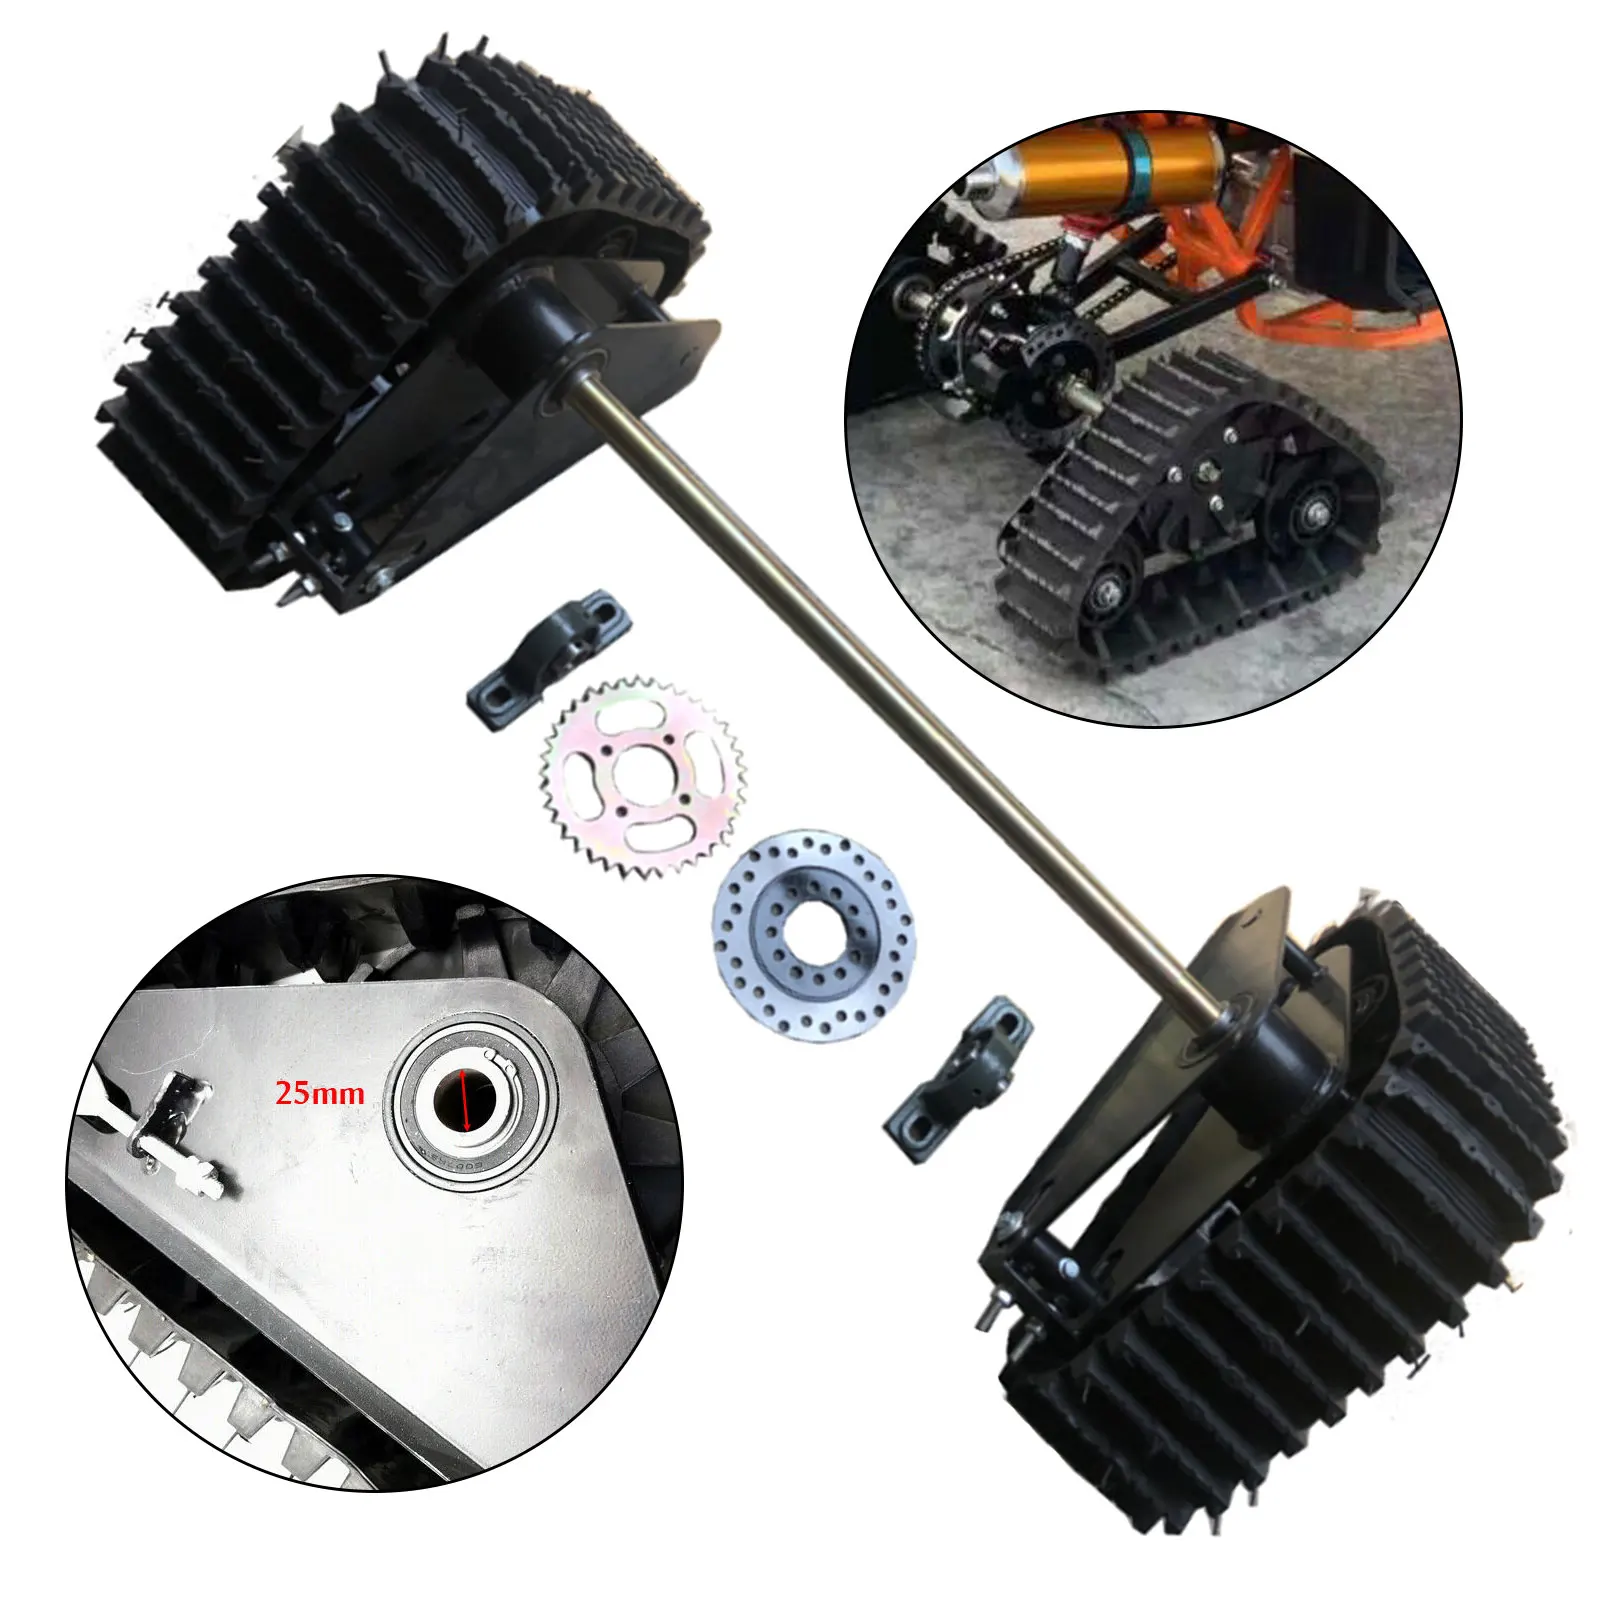 ATV Rear Wheel Buggy Snow Tracks Sand Snowmobile Tracked Vehicle Go Kart Buggy Quad Rear Wheel Assembly Kit Metal Thickened Axle snow blower snow sweeper snow sand snowmobile caterpillar tracks go kart karting utv buggy quad atv snow tracks rubber track